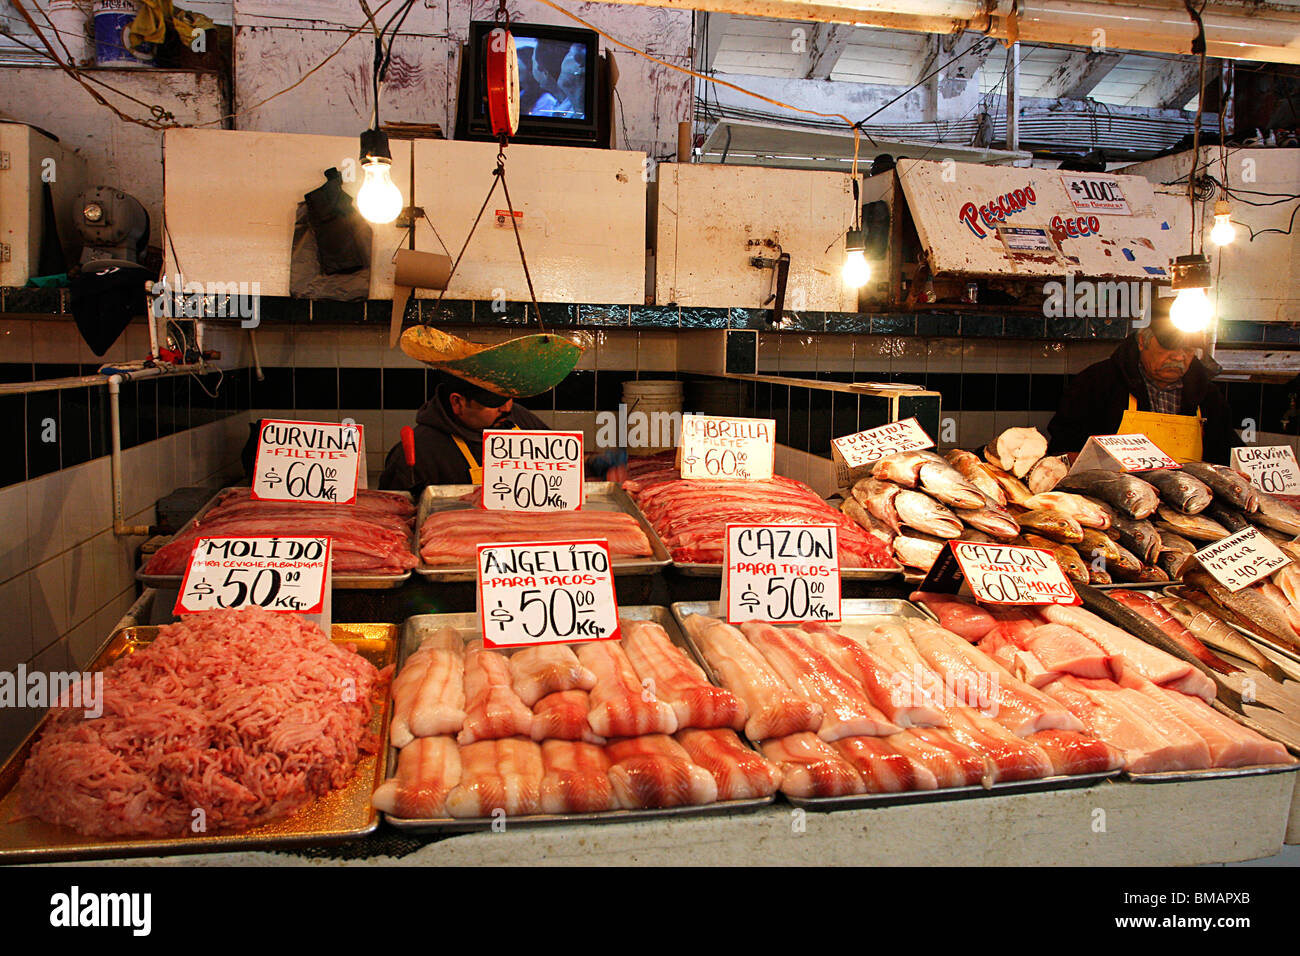 Display of fresh seafood on sale at the famous ENSENADA ,fish market.A popular tourist attraction,Baja California,Mexico. Stock Photo